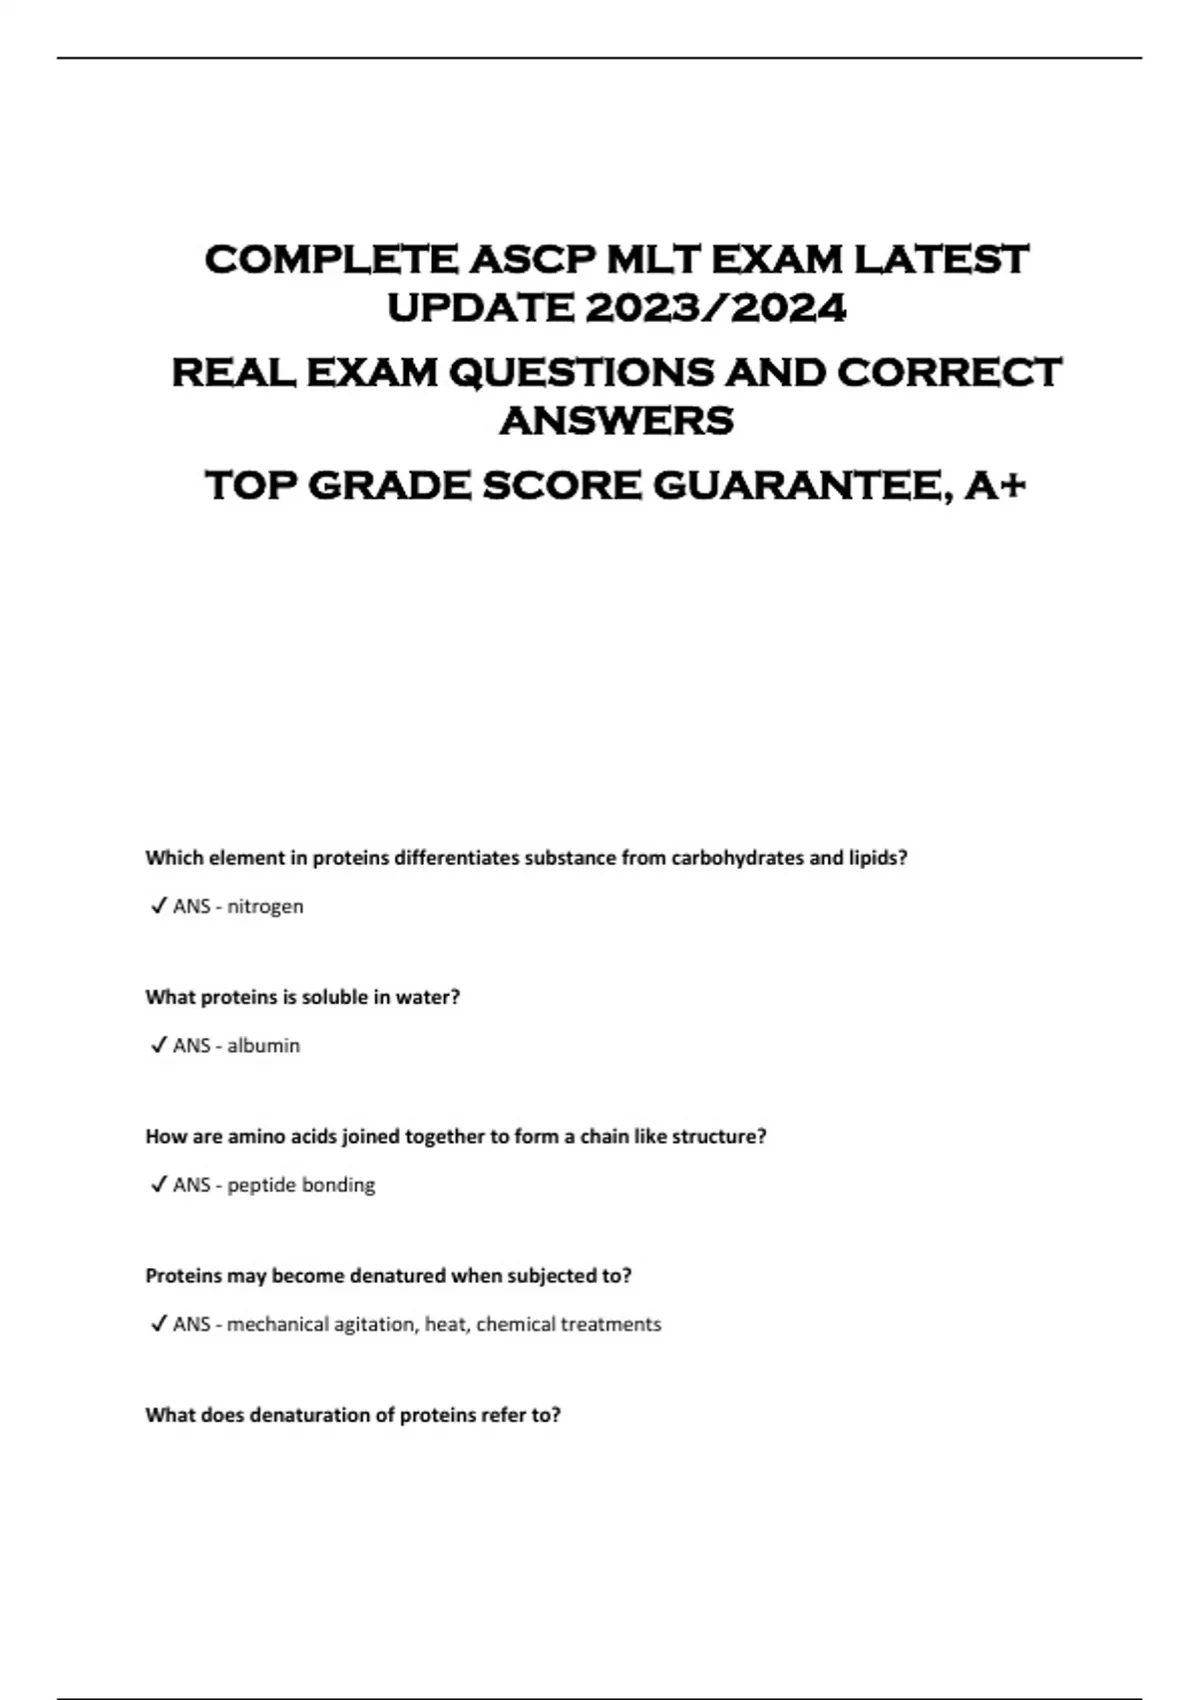 COMPLETE ASCP MLT EXAM LATEST UPDATE 2023/2024 REAL EXAM QUESTIONS AND